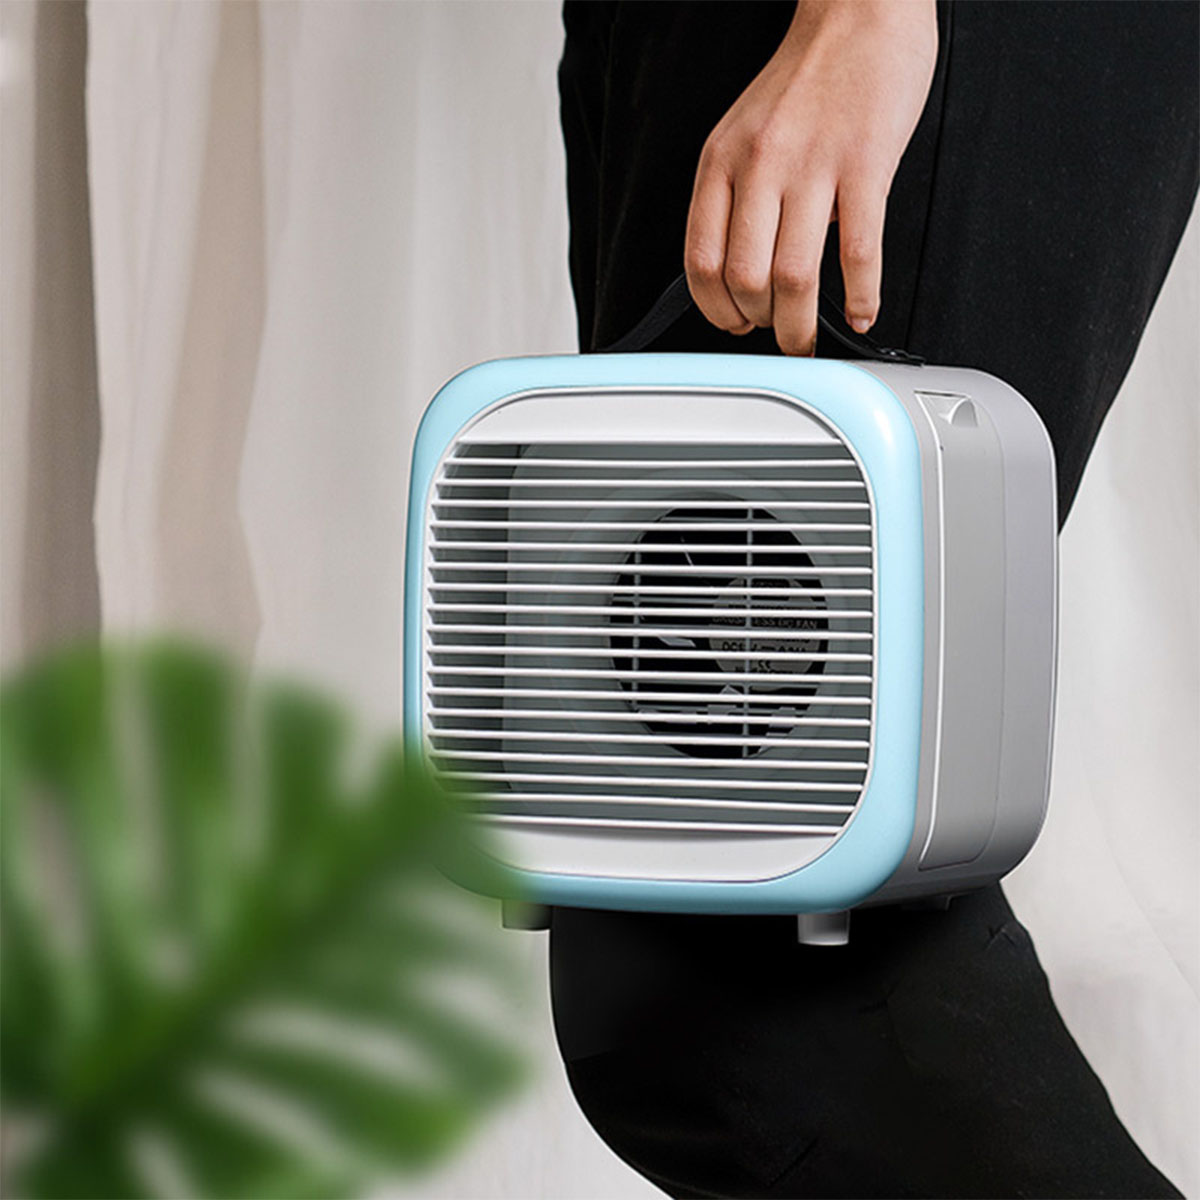 Find USB Mini Air Conditioner Fan Personal Air Cooler Desktop Cooling Fan Air Purifier Humidifier for Home Office Dorm Car for Sale on Gipsybee.com with cryptocurrencies